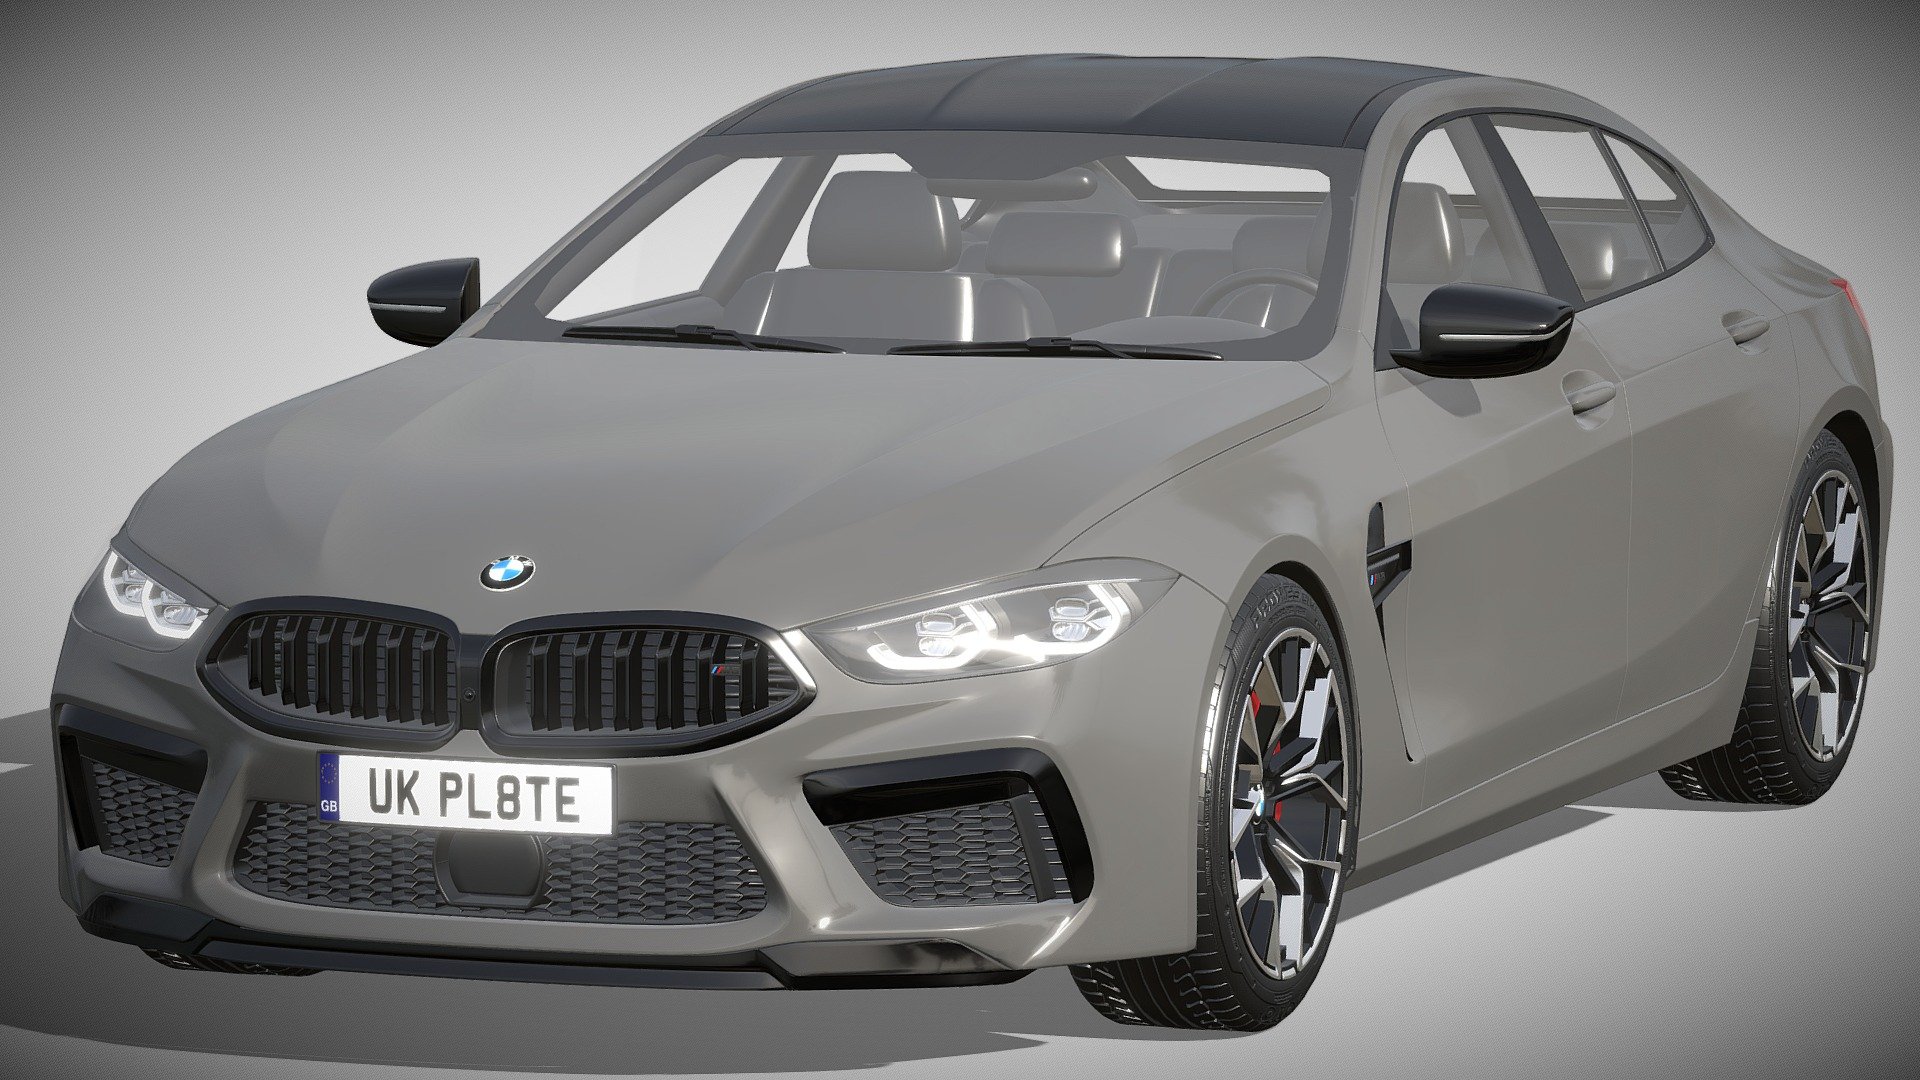 BMW M8 Gran Coupe

https://www.bmw.ru/ru/all-models/m-series/m8-gran-coupe/2019/bmw-8-series-gran-coupe-m-automobiles-highlights.html

Clean geometry

Light weight model, yet completely detailed for HI-Res renders

Use for movies, Advertisements or games

Corona render and materials

All textures include in *.rar files

Lighting setup is not included in the file! - Bmw M8 Gran Coupe - Buy Royalty Free 3D model by zifir3d 3d model